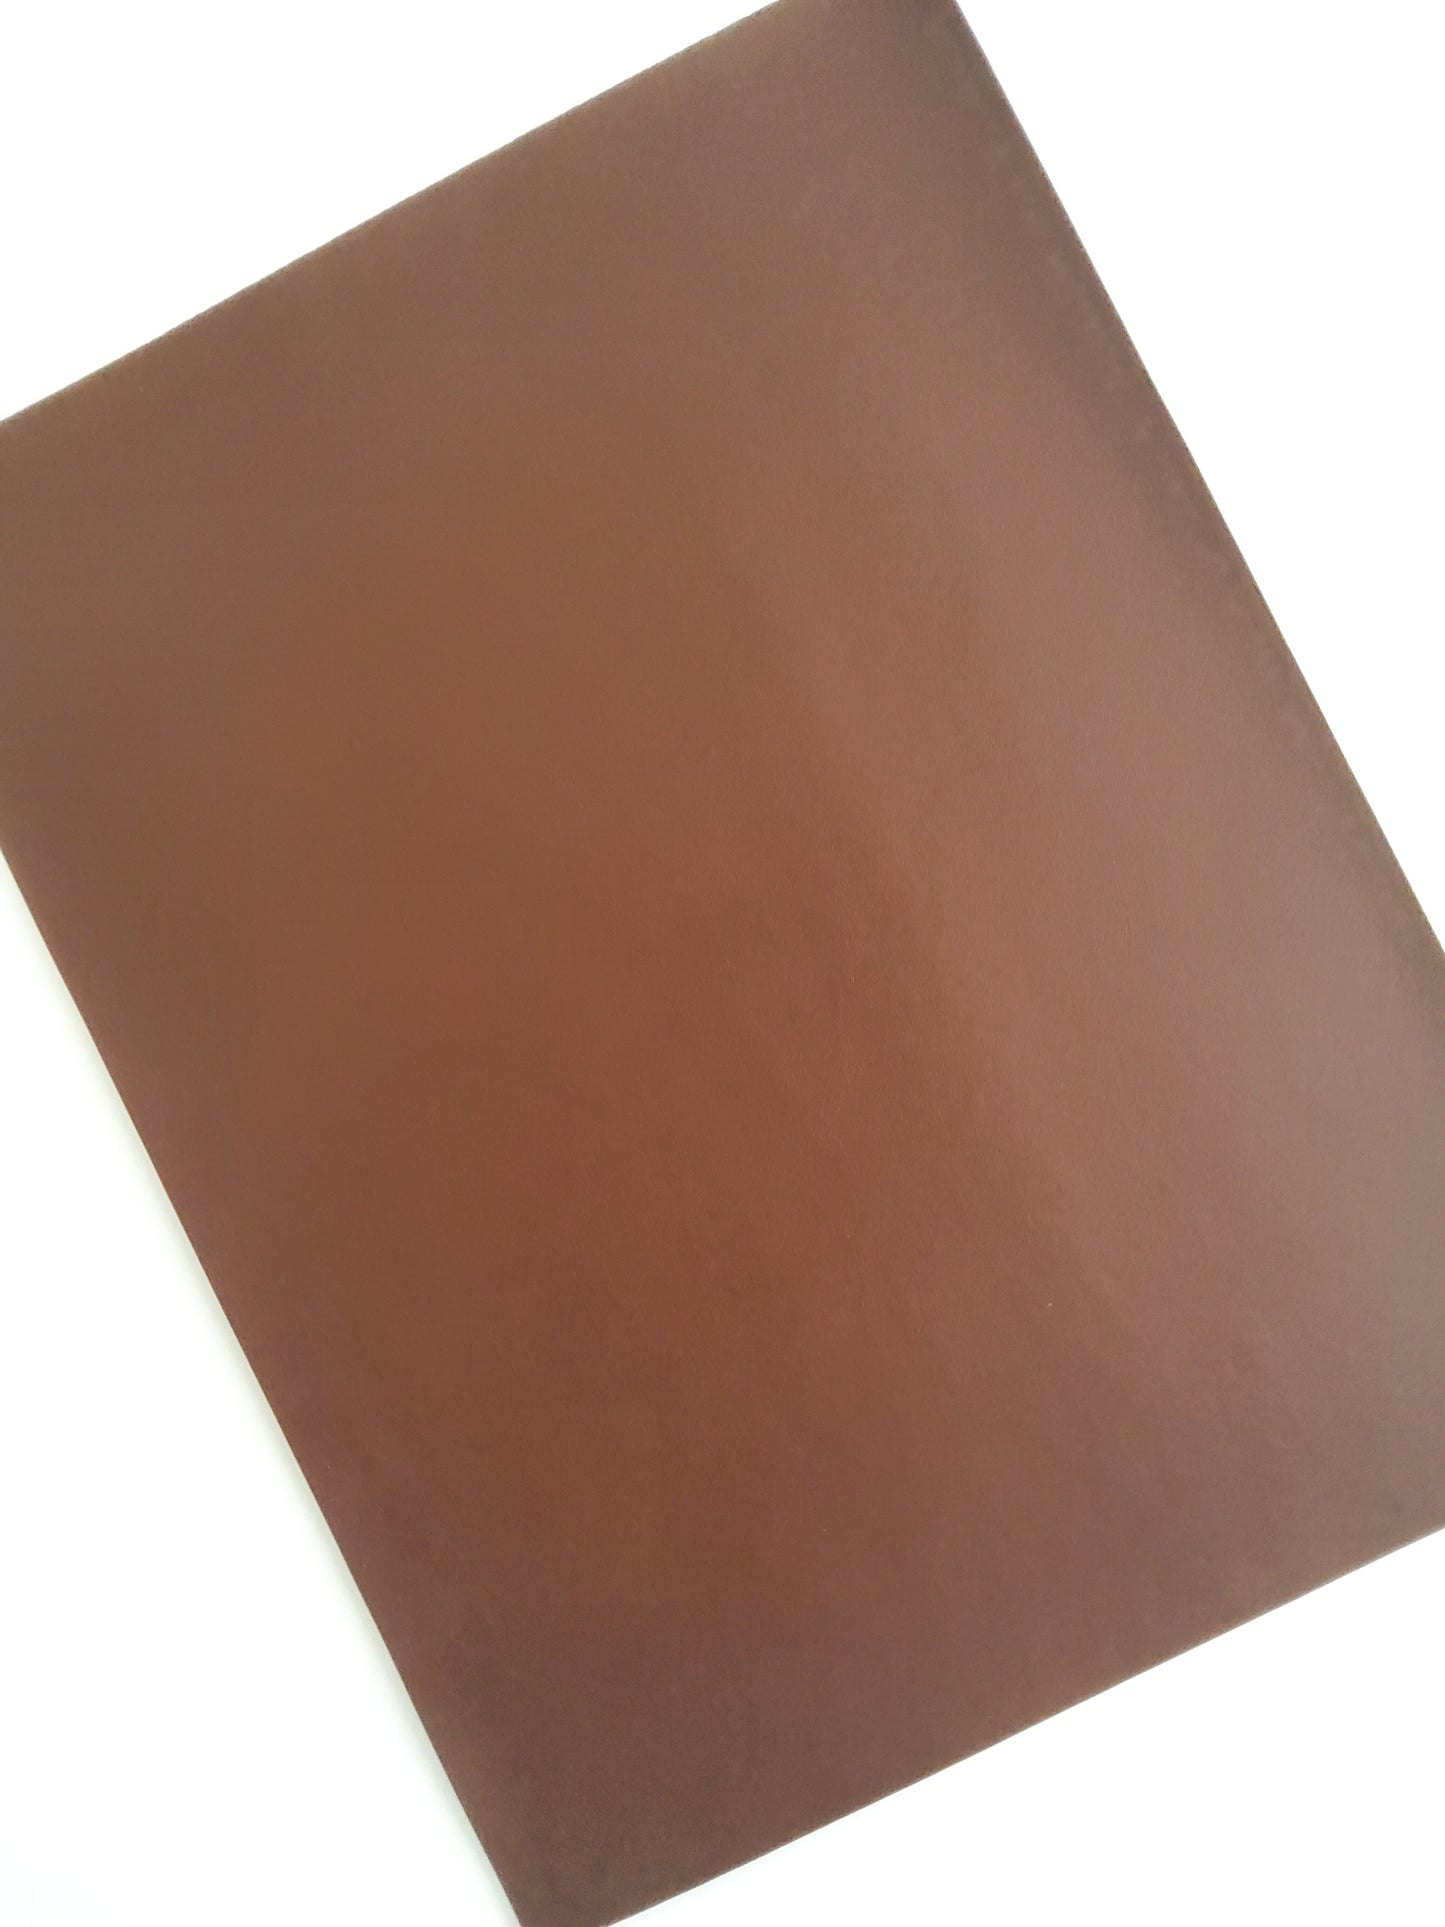 Brown Smooth 9x12 faux leather sheet